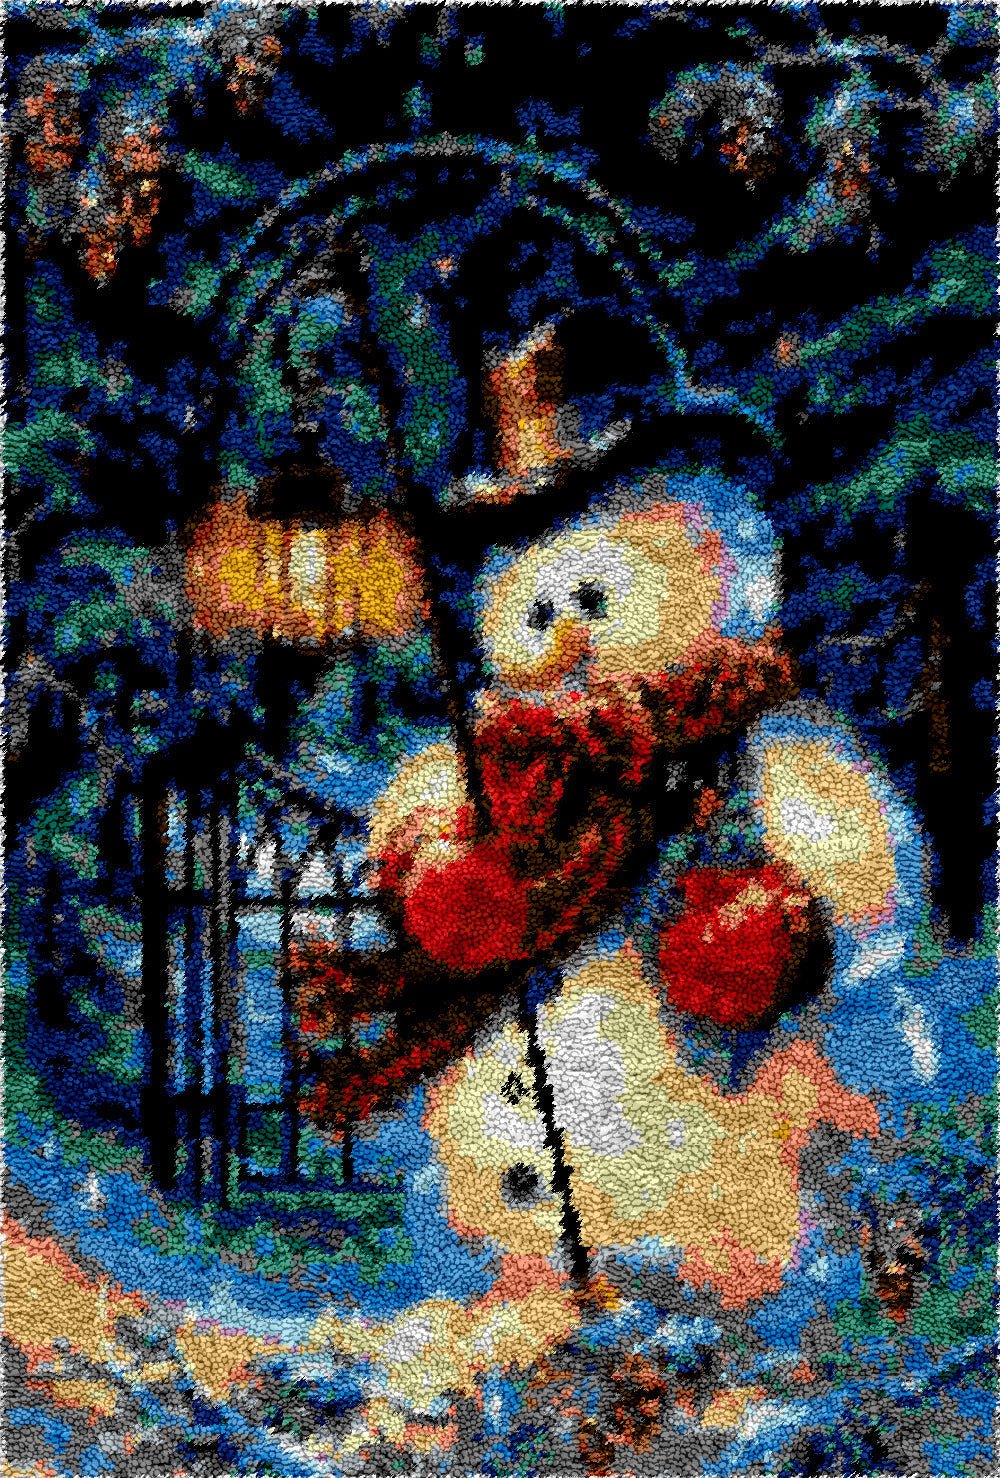 Friendly Snowman DIY Latch Hook Rug Making Kit For Adults – Latch Hook  Crafts